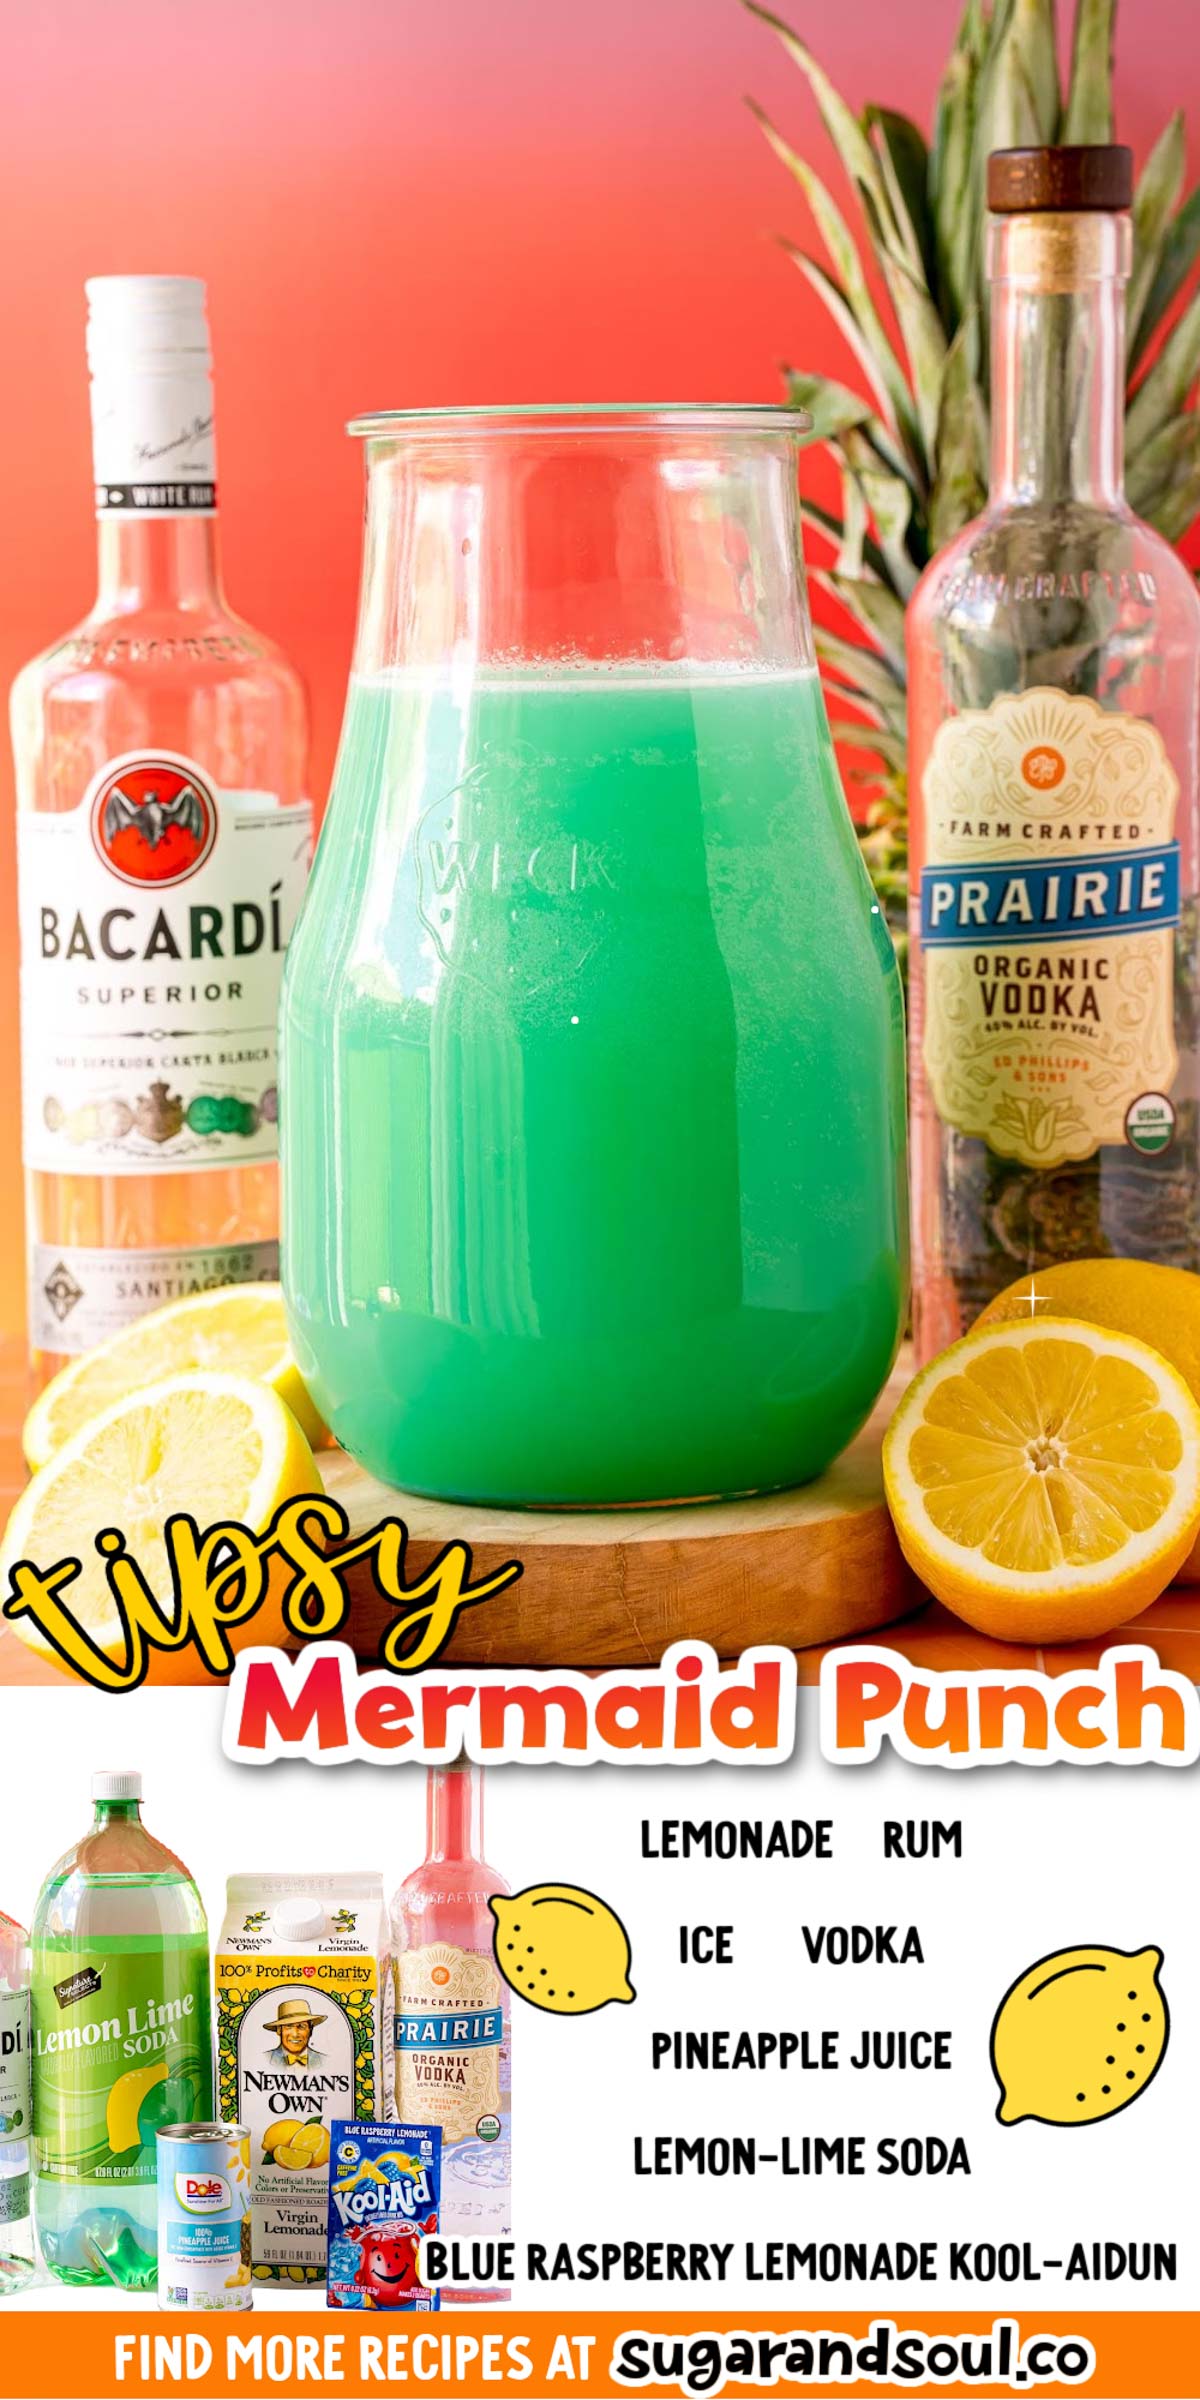 recipe for punch with sprite